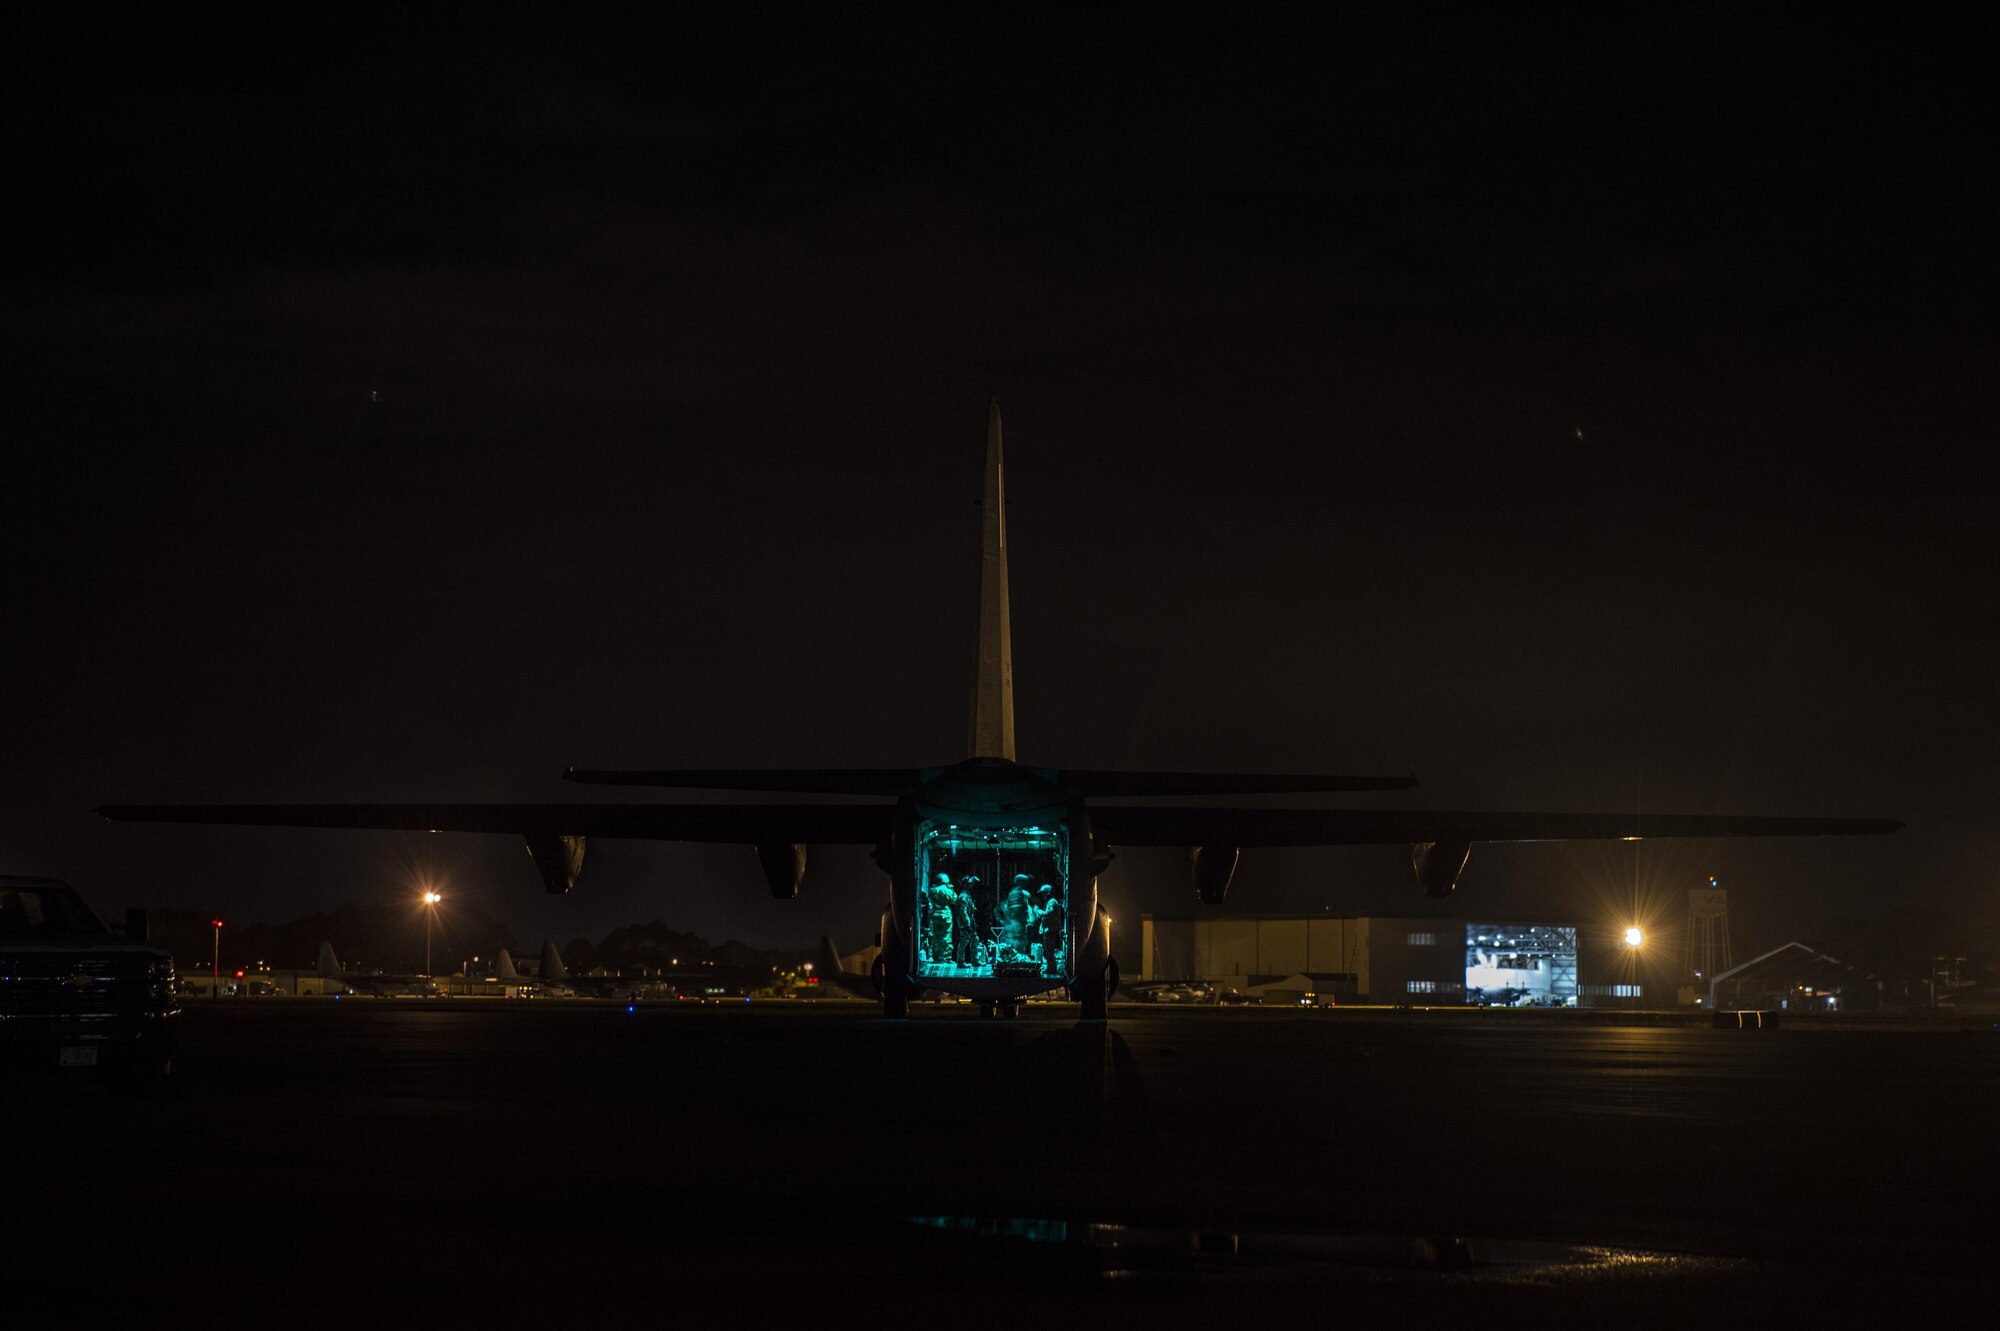 Air Commandos with the 1st Special Operations Logistics Readiness Squadron prepare to conduct a forward area refueling point operation from an EC-130J Commando Solo assigned to the 193rd Special Operations Wing, Middletown, Pa., at Hurlburt Field, Fla., June 13, 2017. Forward area refueling points enable global reach and mission accomplishment. (U.S. Air Force photo by Airman 1st Class Joseph Pick)